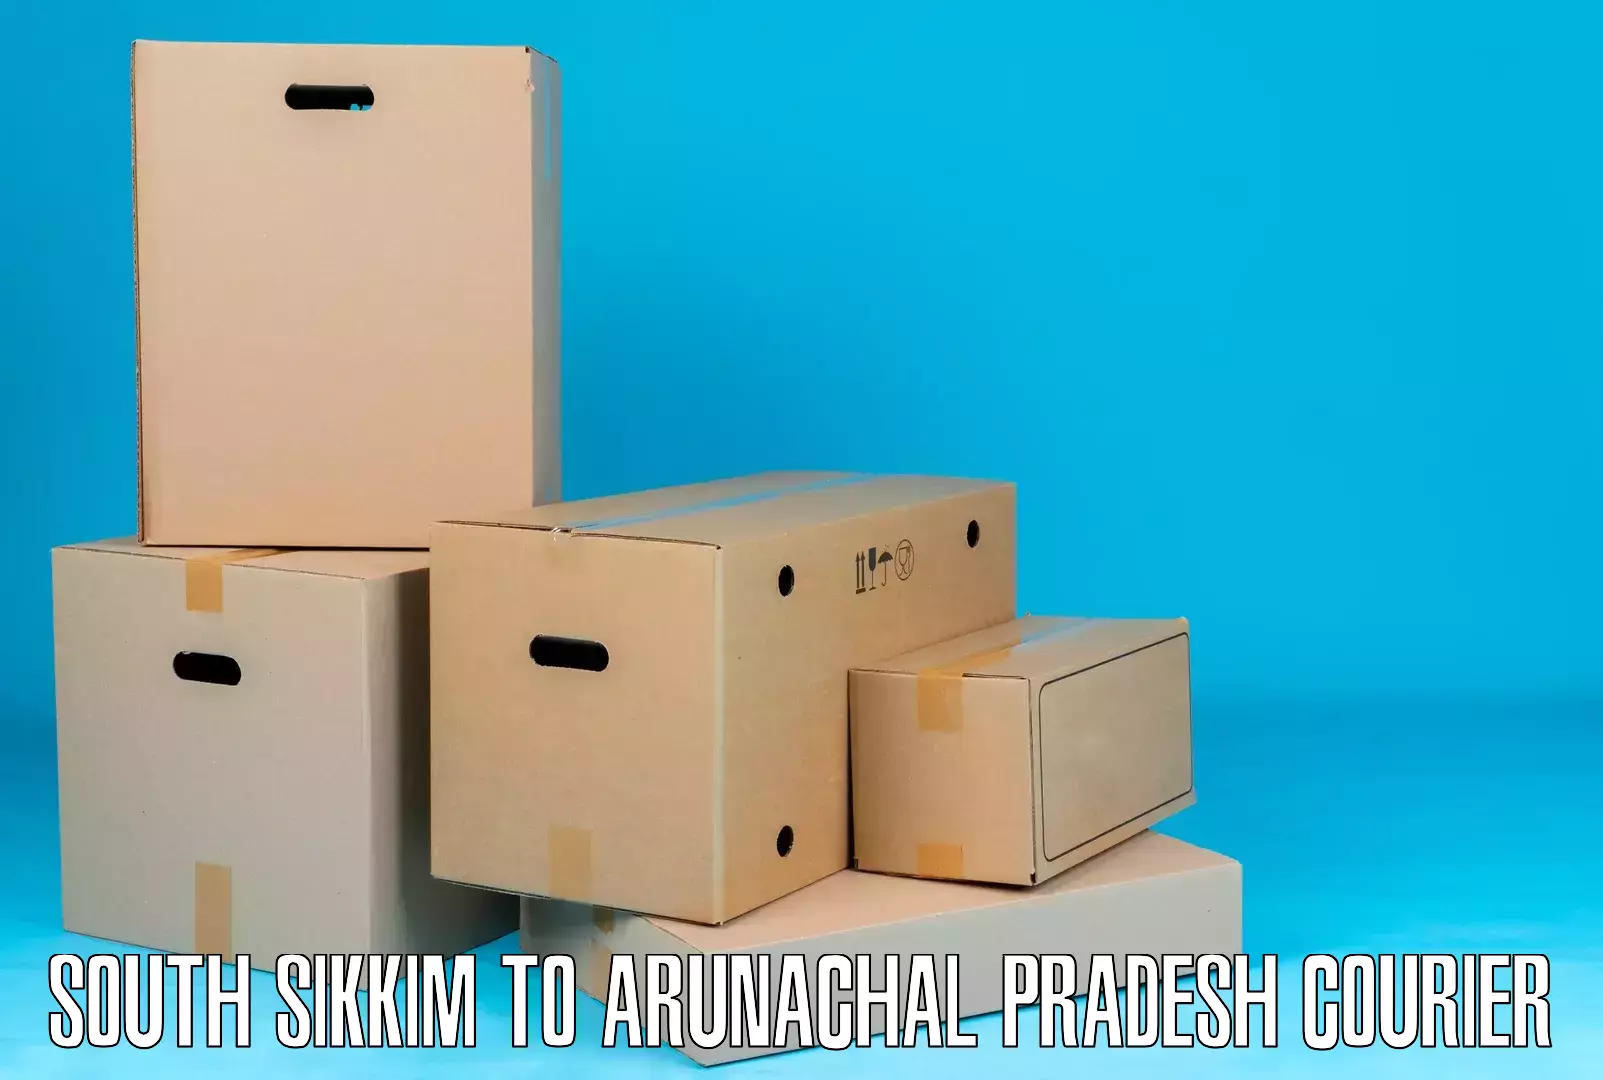 Quality courier partnerships in South Sikkim to Aalo